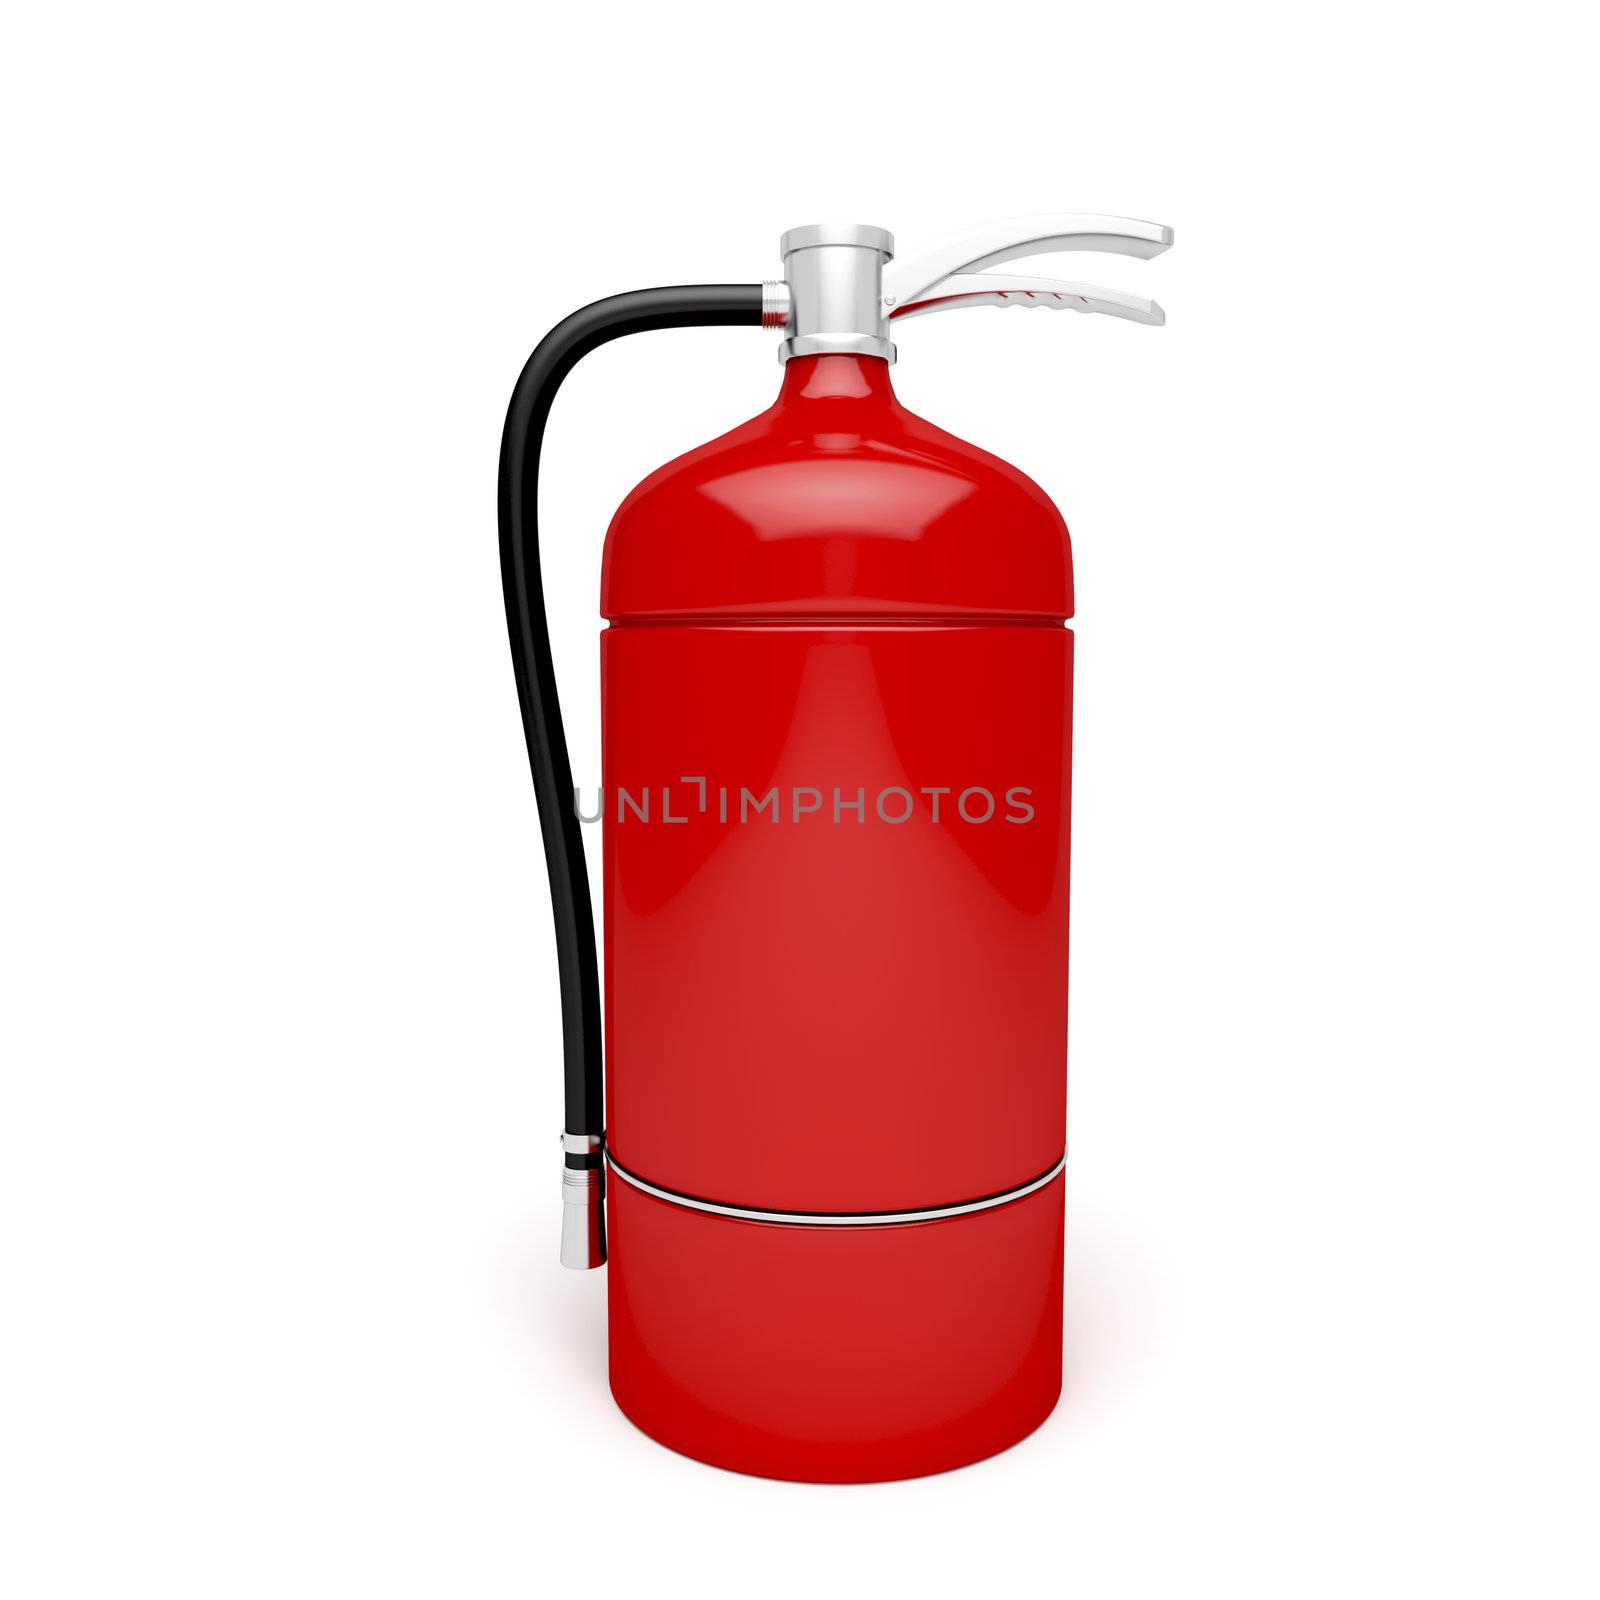 3d image of fire extinguisher